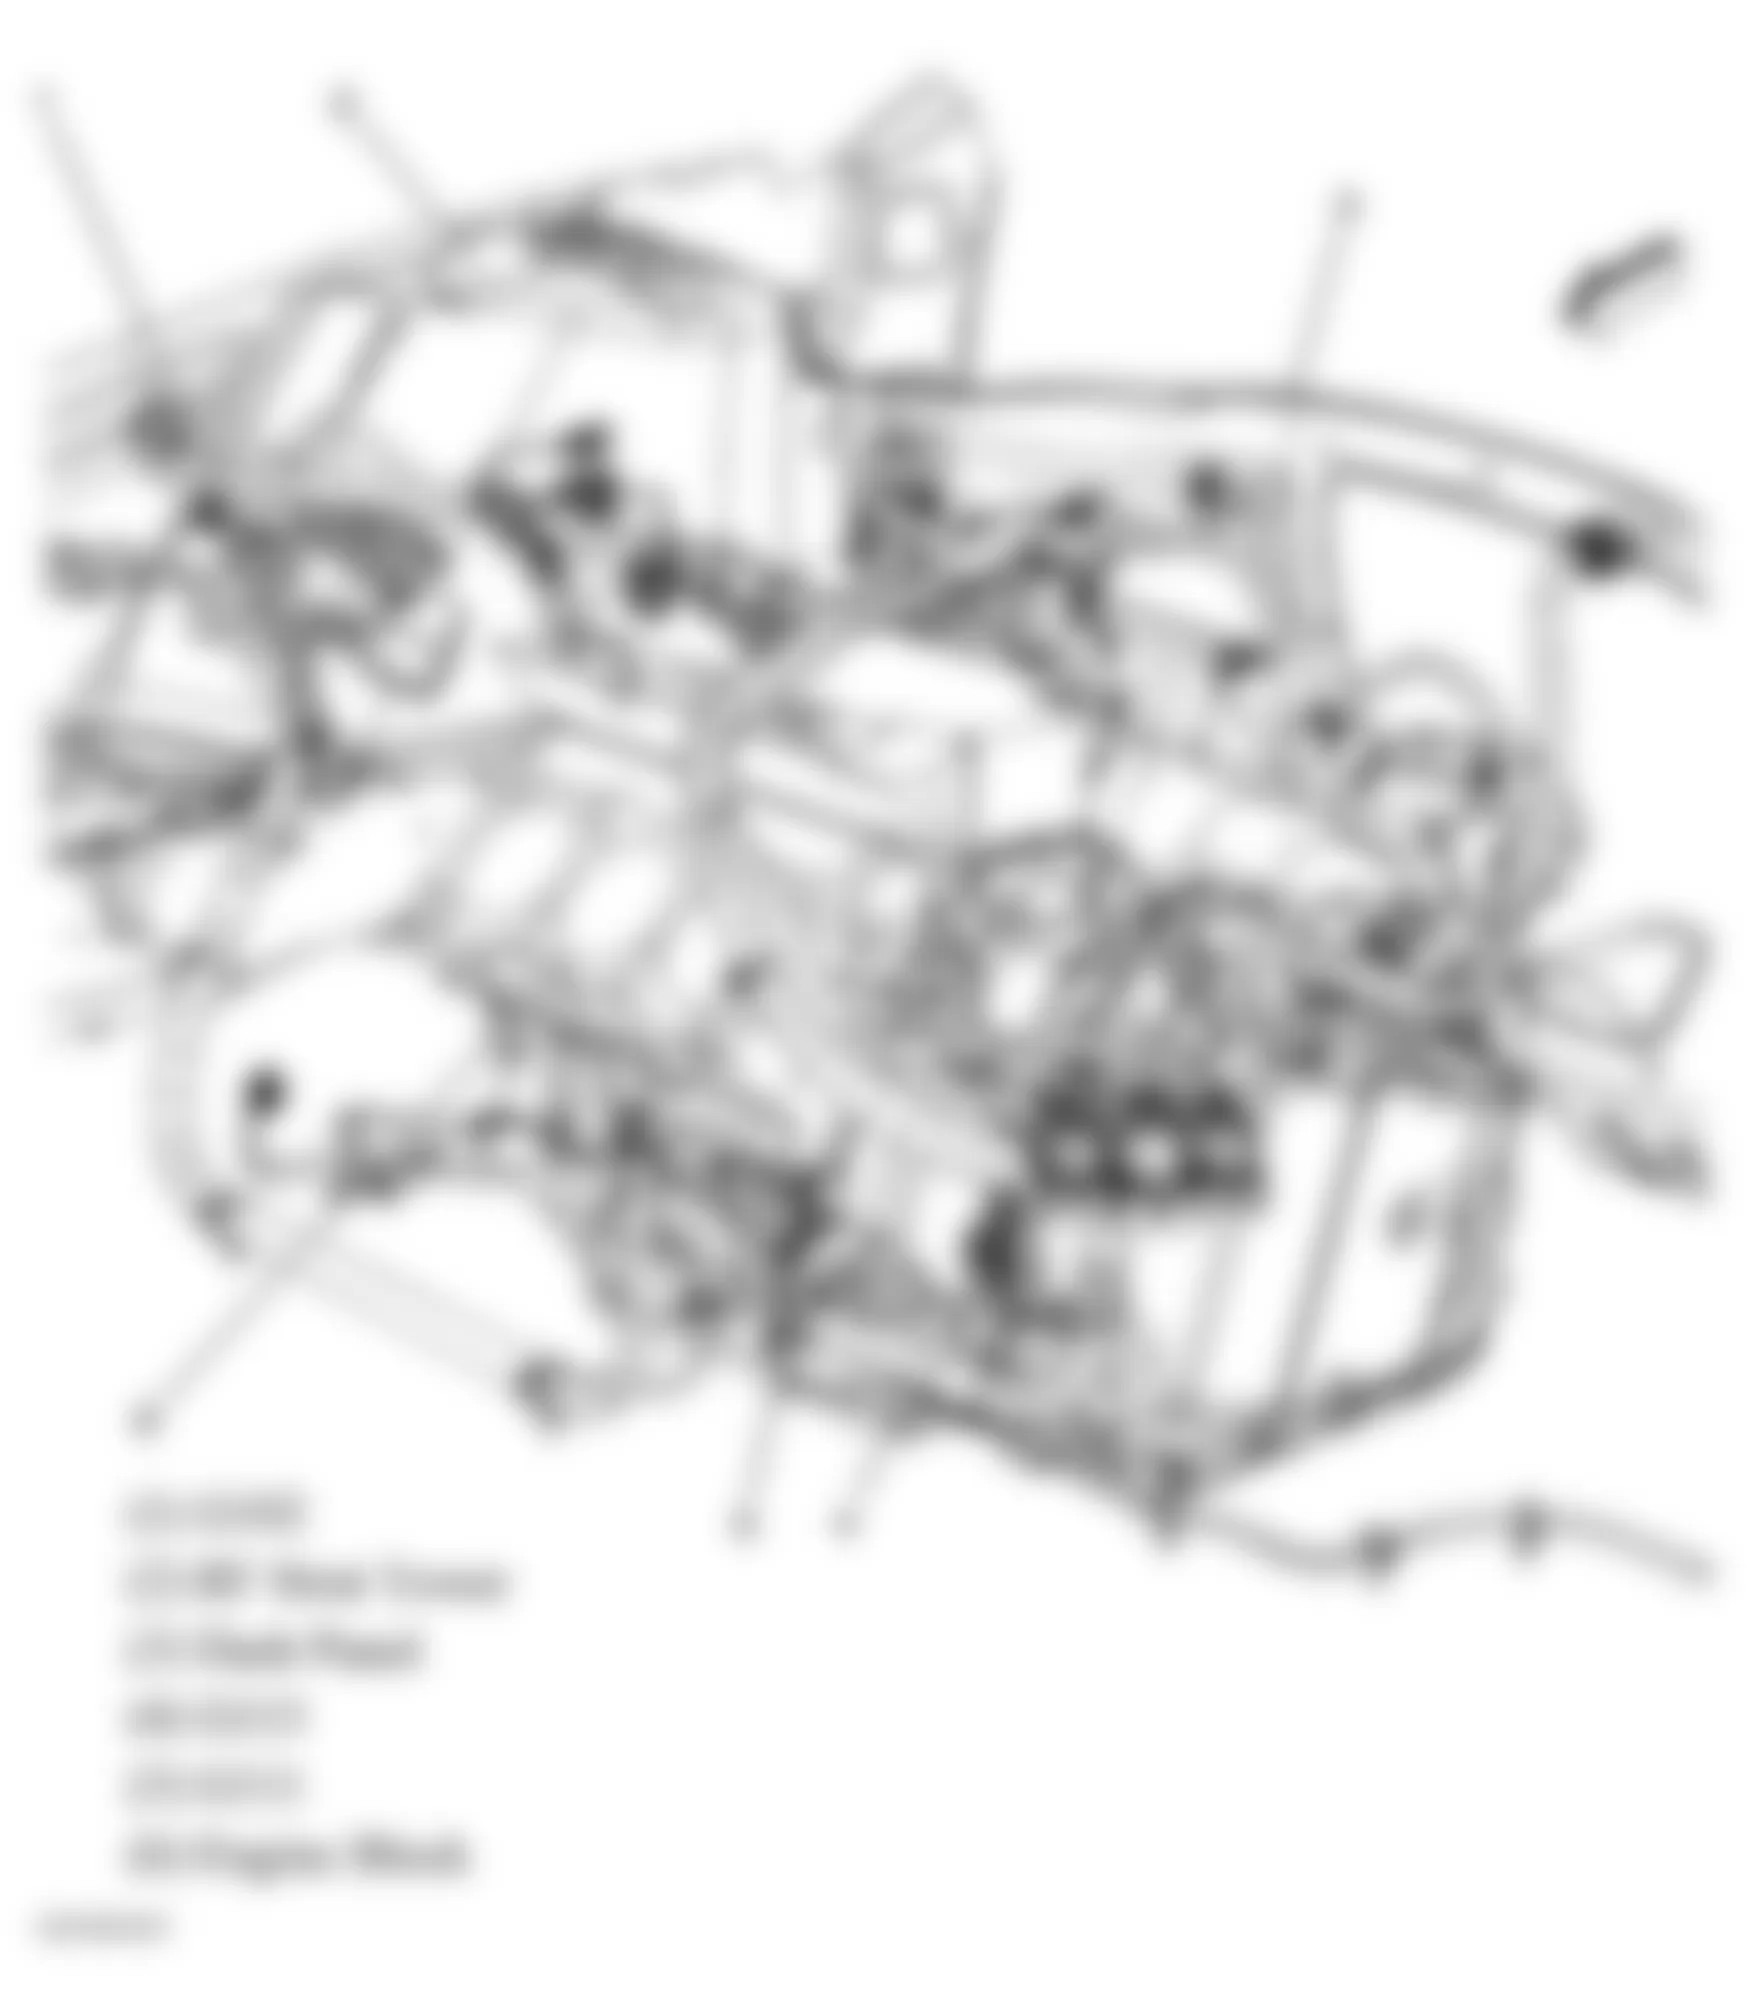 Buick Allure CXL 2008 - Component Locations -  Engine/Transmission Assembly